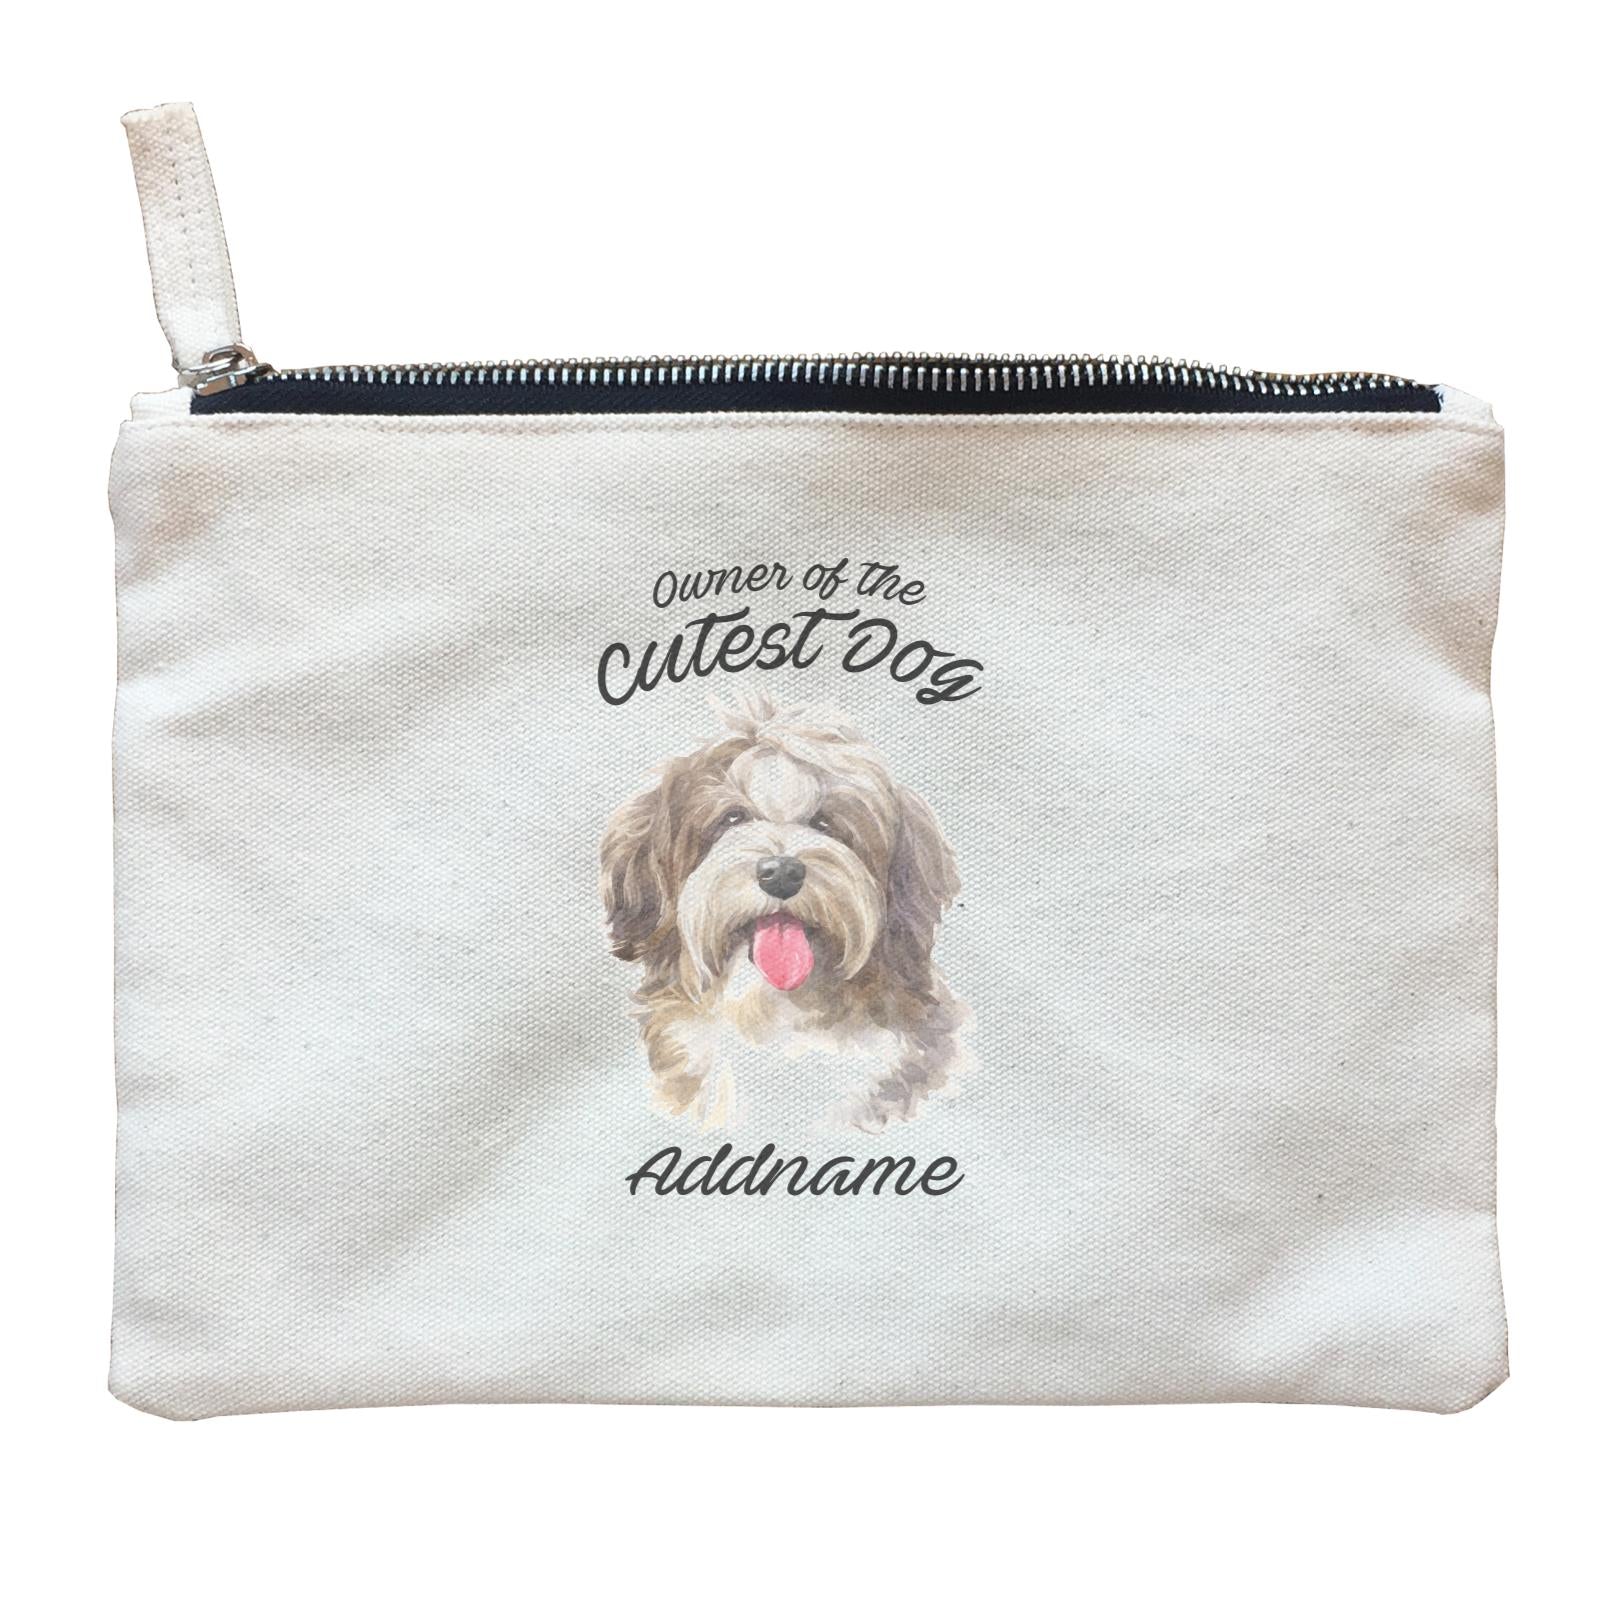 Watercolor Dog Owner Of The Cutest Dog Shaggy Havanese Addname Zipper Pouch